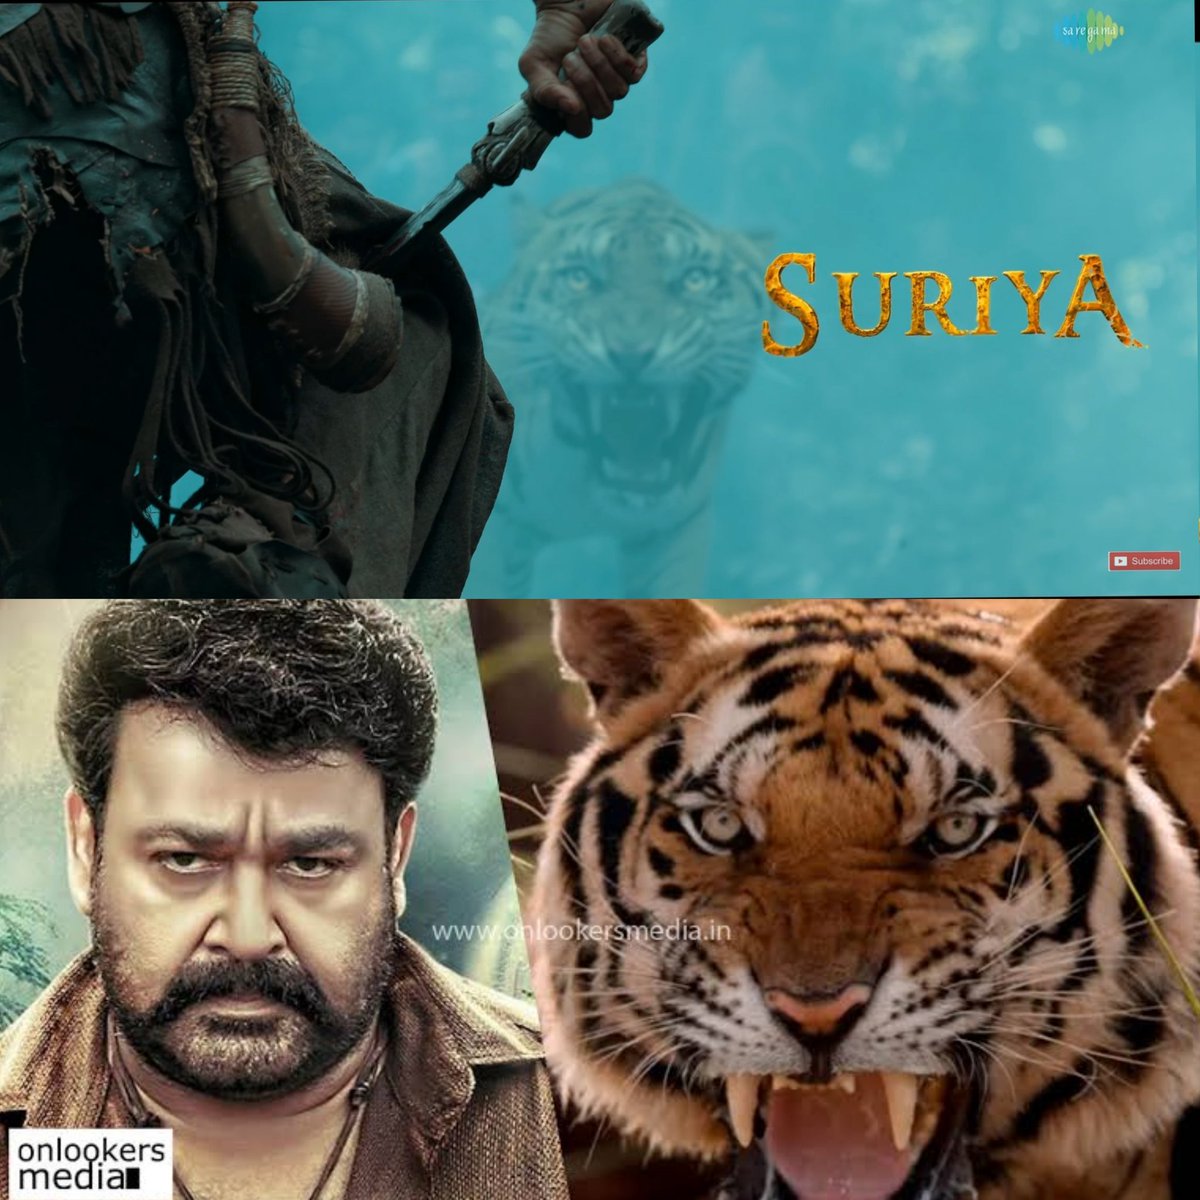 In the Malayalam film Pulimurugan, the team went to Thailand to shoot Close Reactions and Sound of the Real Tiger to use in the film

It seems the #Kanguva Team has used the same technique
 
Real Tiger's Face Reaction + CG